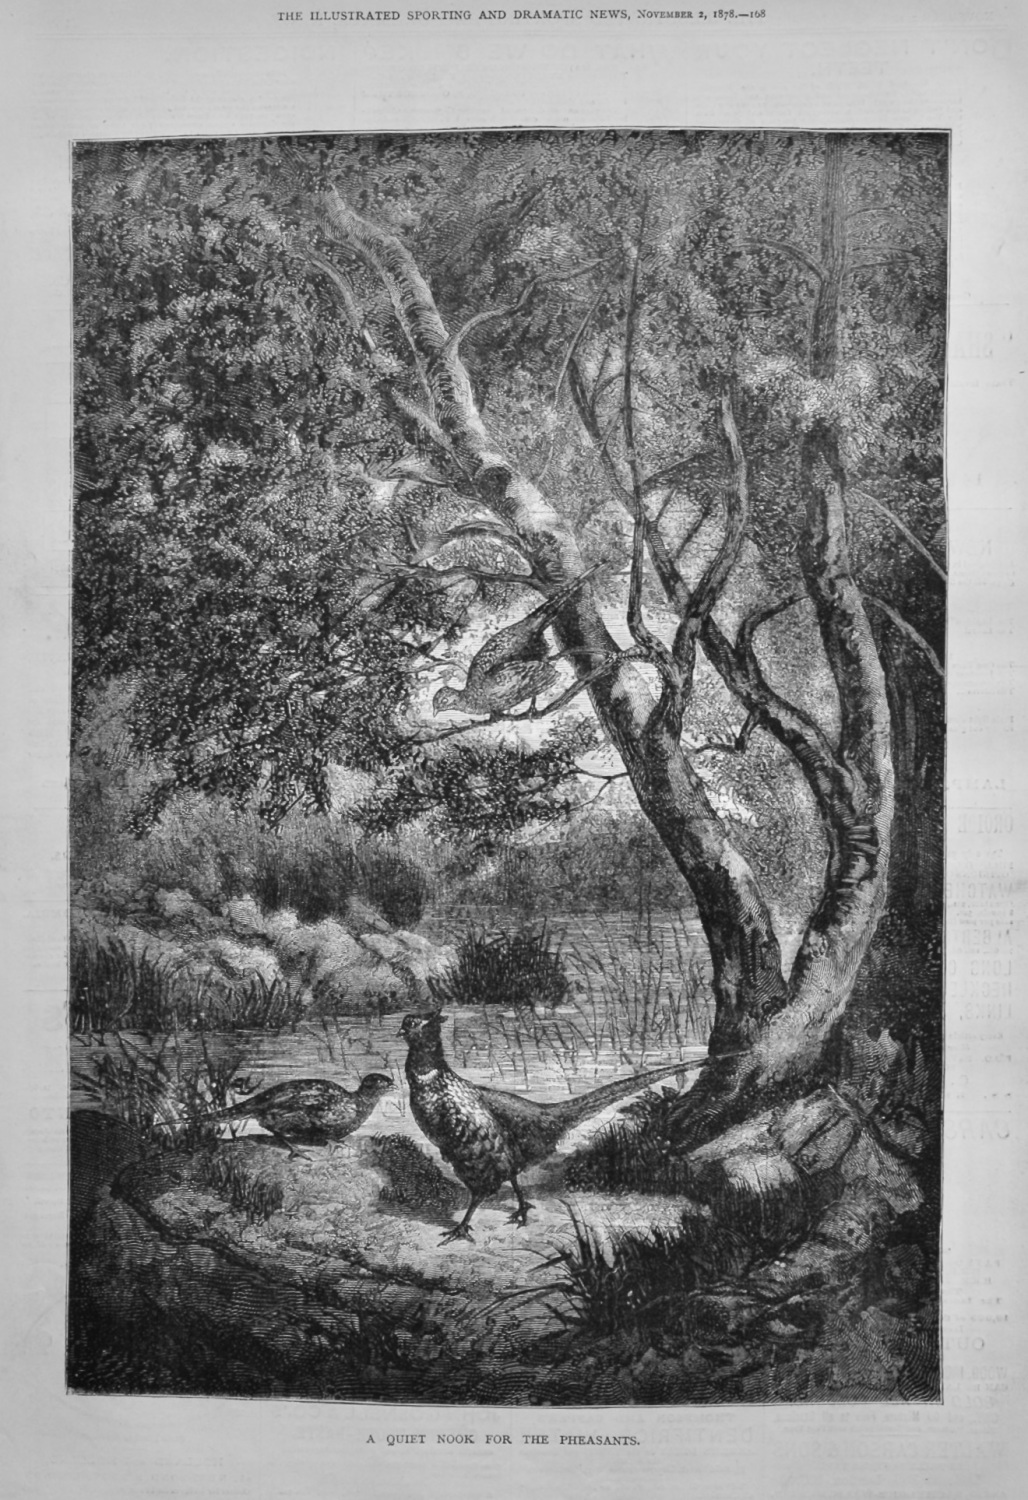 A Quiet Nook for the Pheasants.  1878.